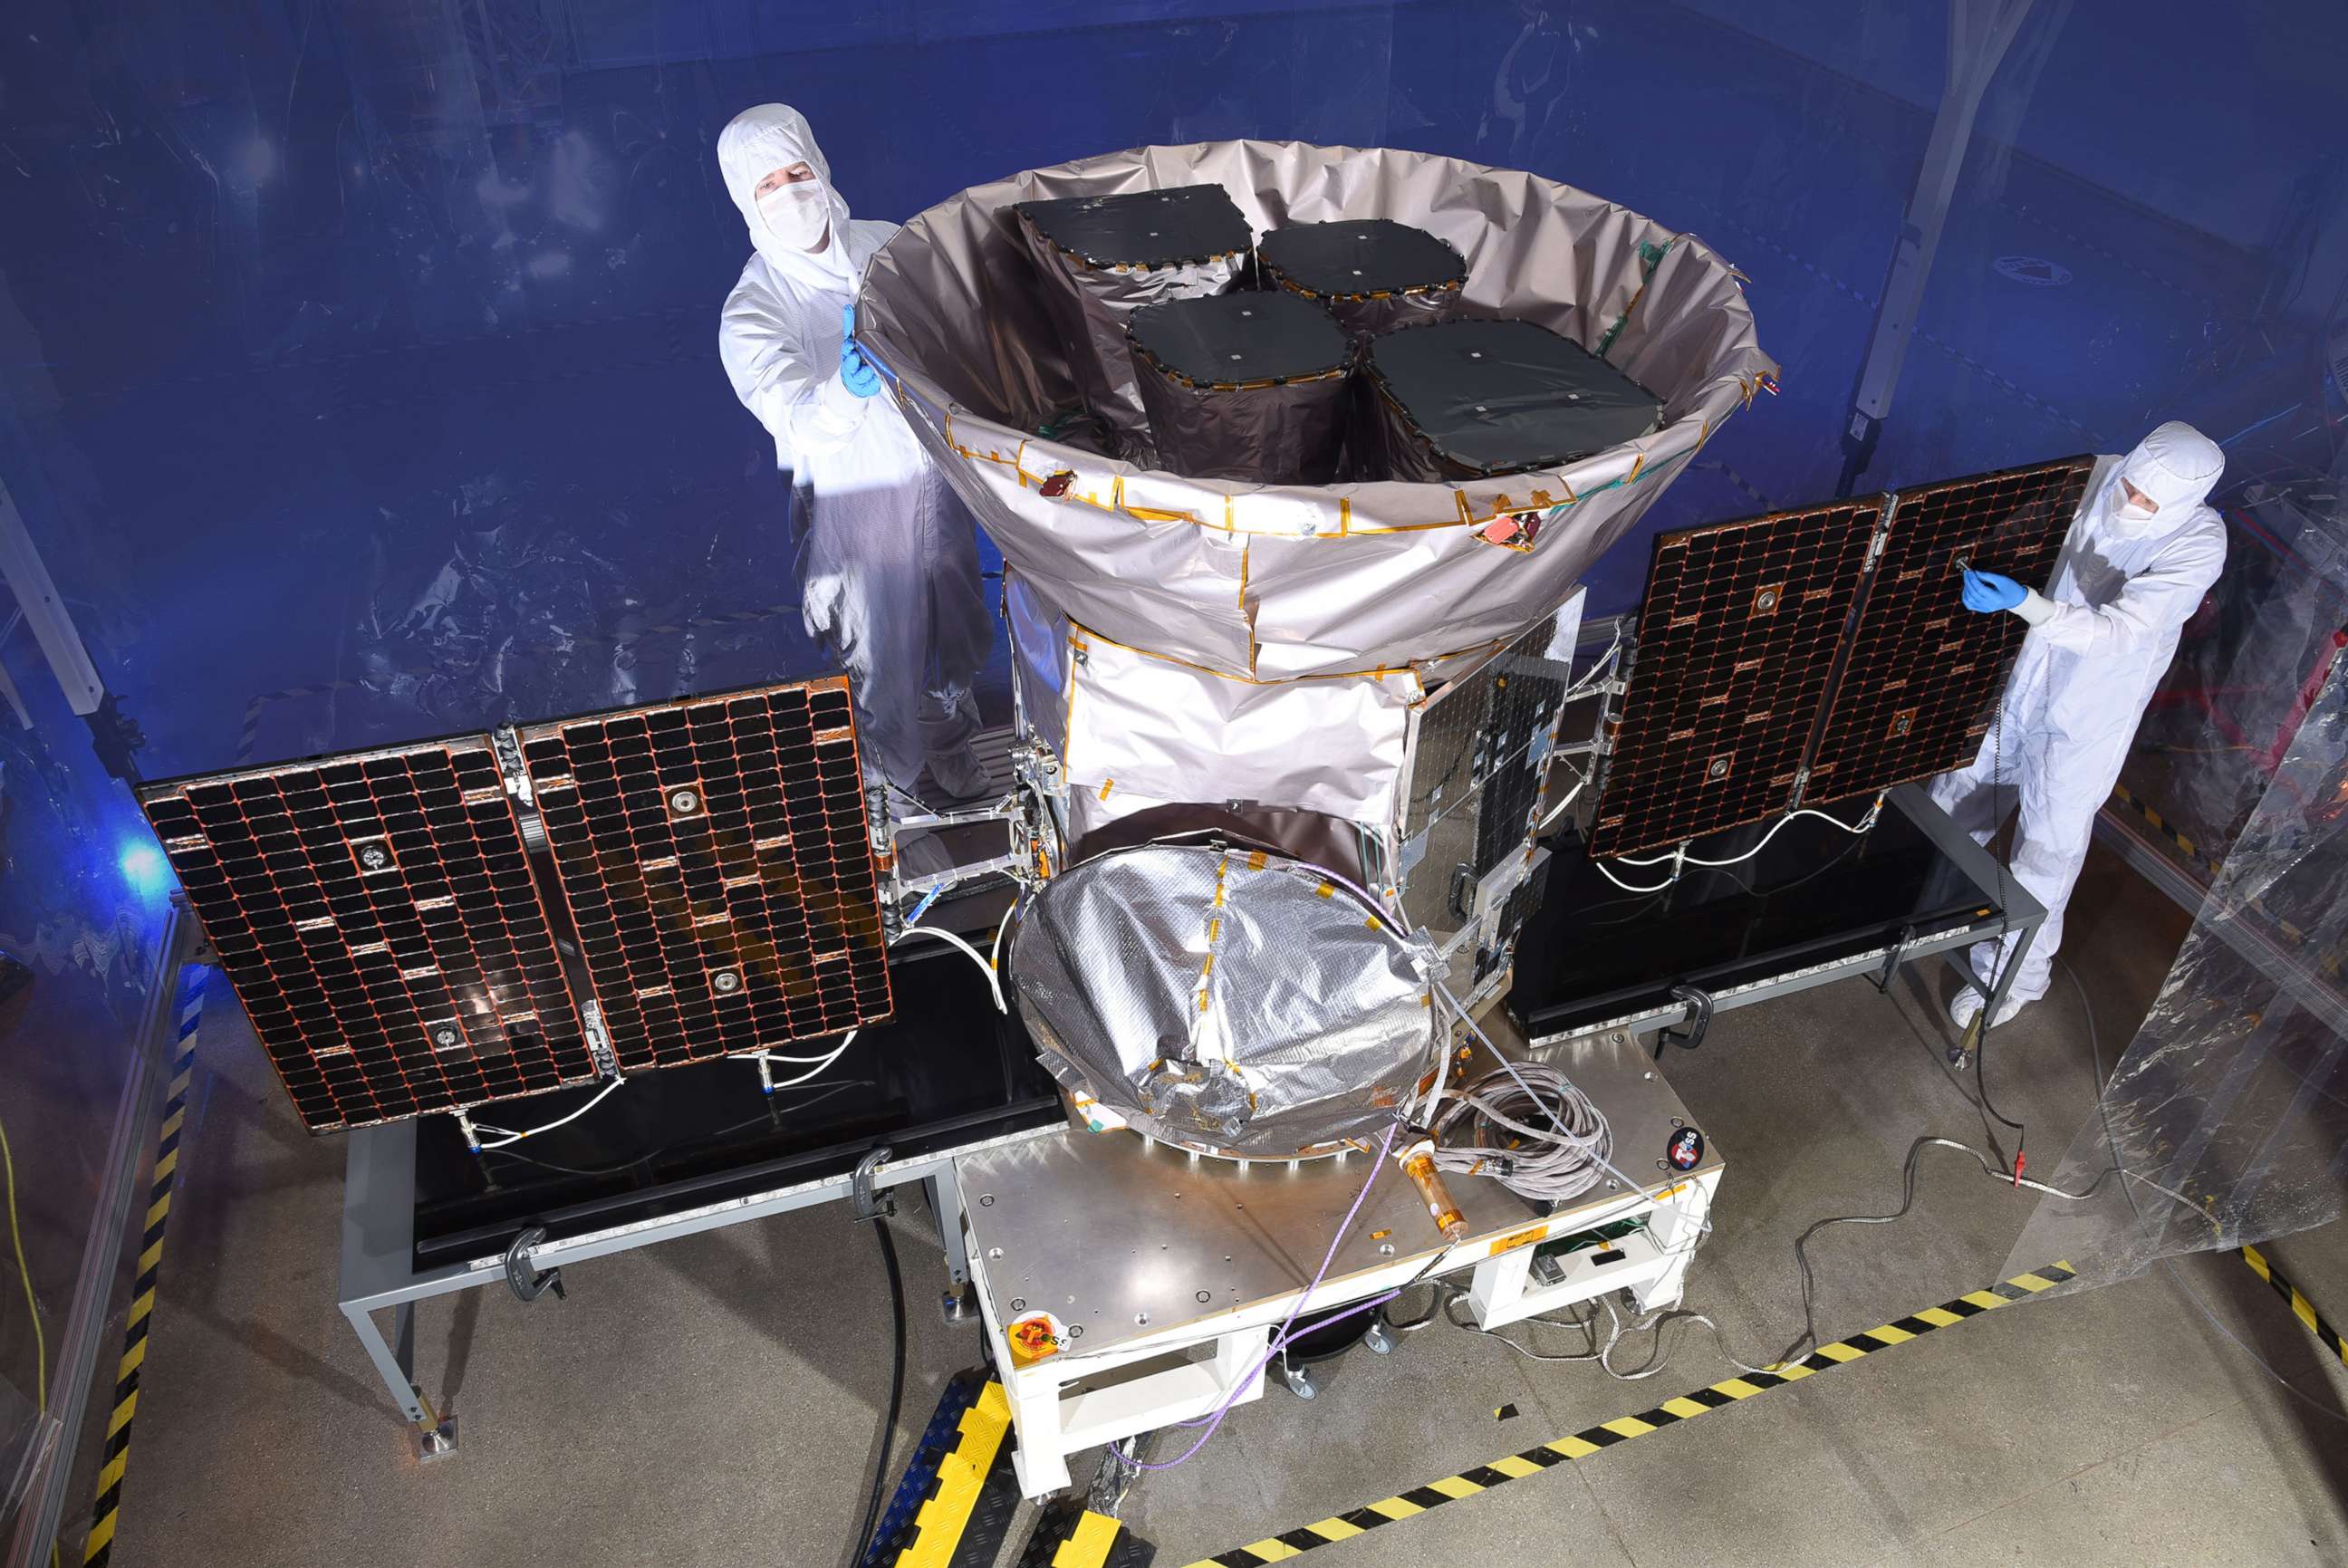 PHOTO: TESS, the Transiting Exoplanet Survey Satellite, is pictured with NASA technicians in an image released on March 28, 2018.